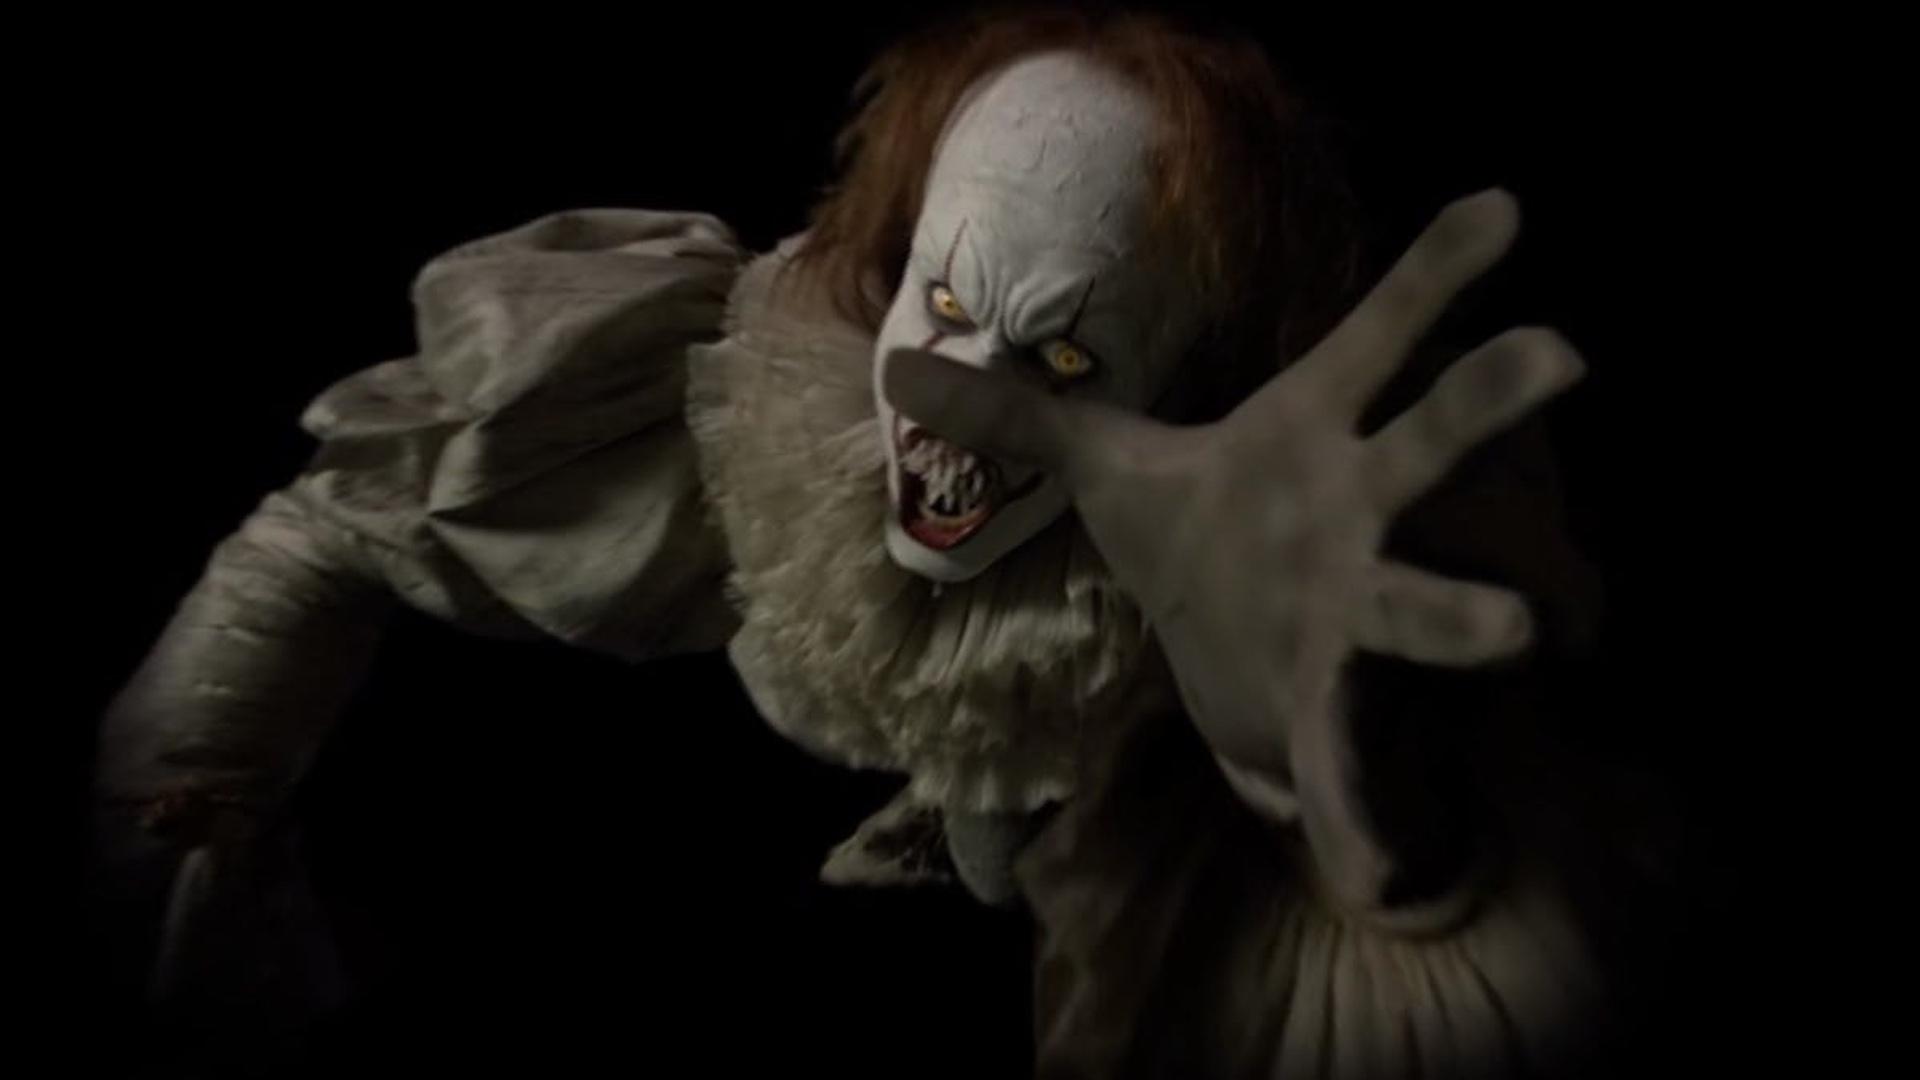 New Set Photo From IT: CHAPTER 2 Features Pennywise The Clown Being